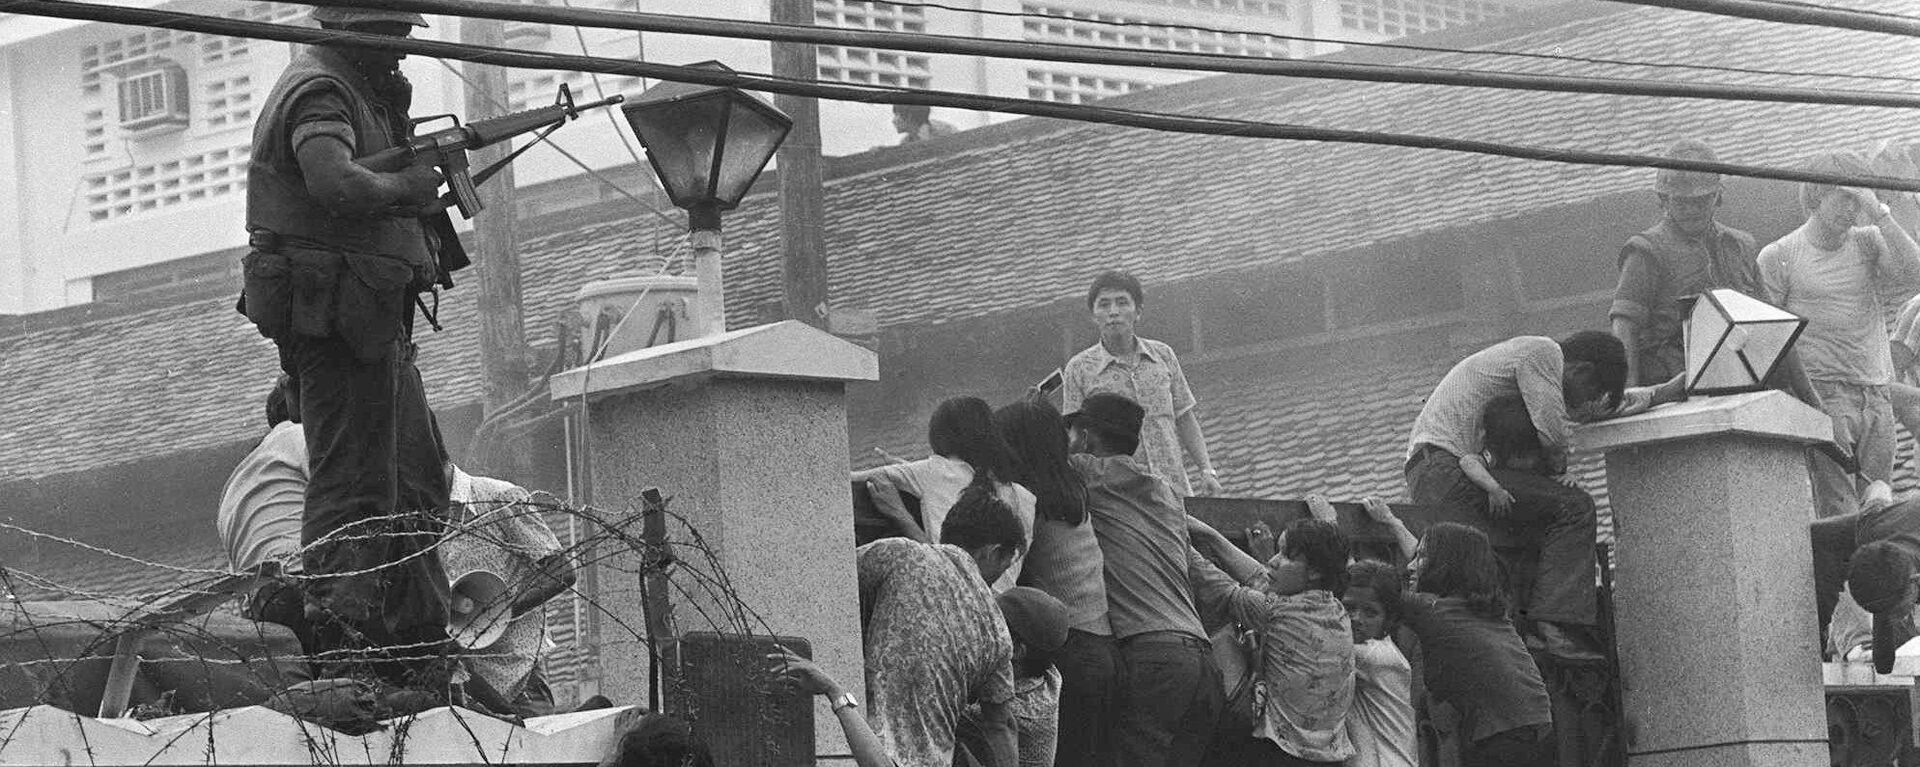 People clamber into the US embassy compound during the fall of Saigon in 1975 - Sputnik International, 1920, 16.08.2021